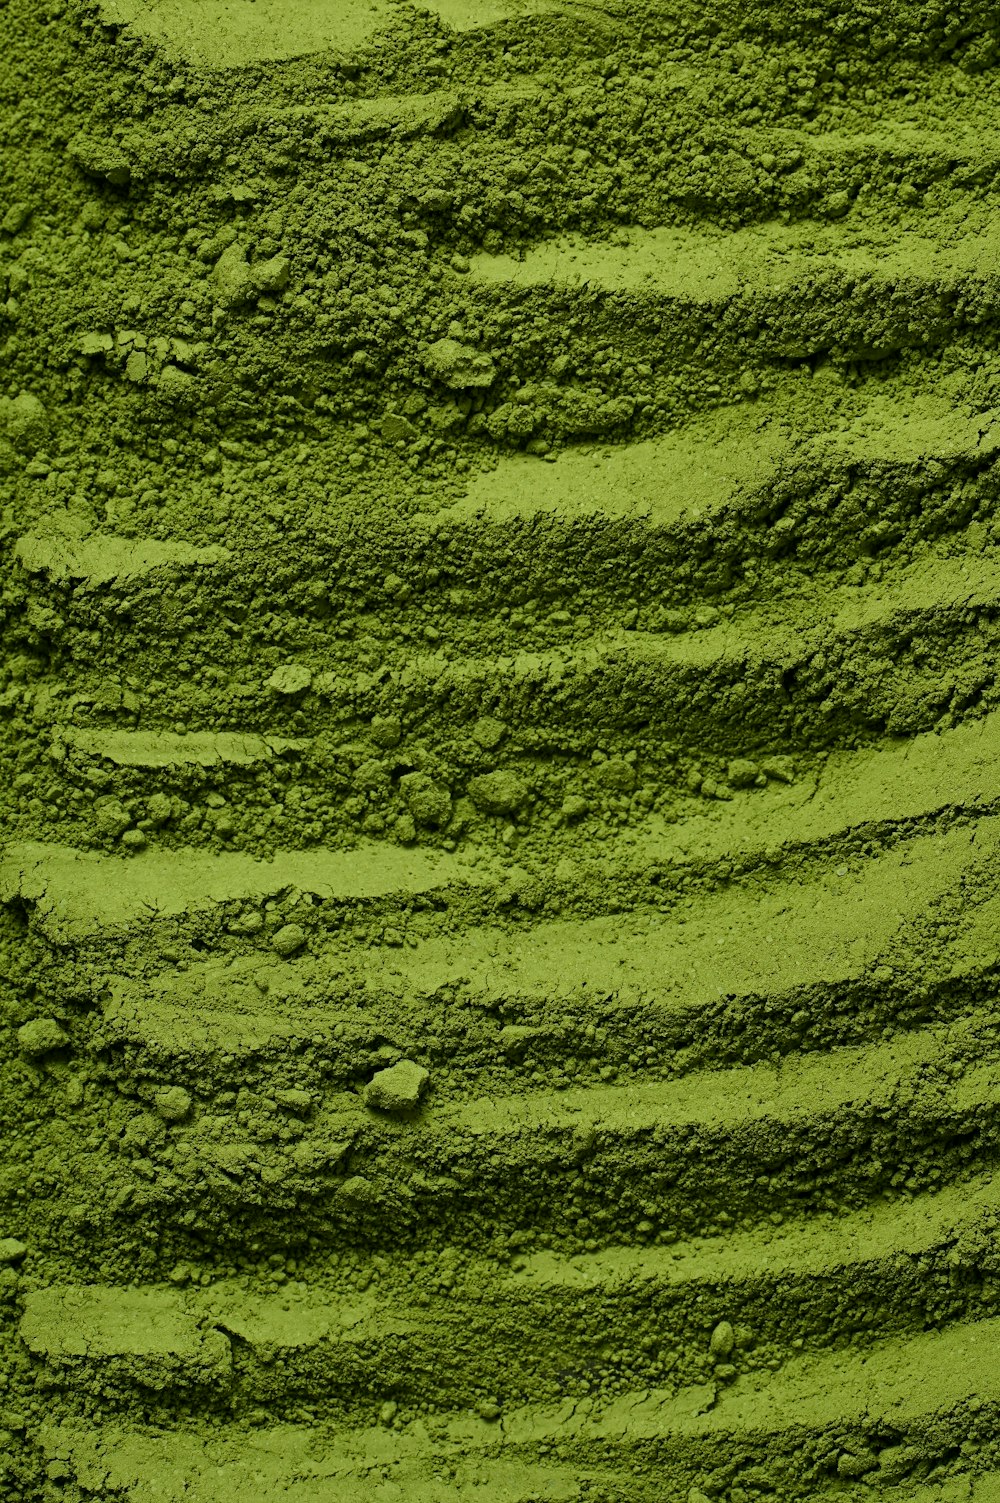 a close up of a green colored substance